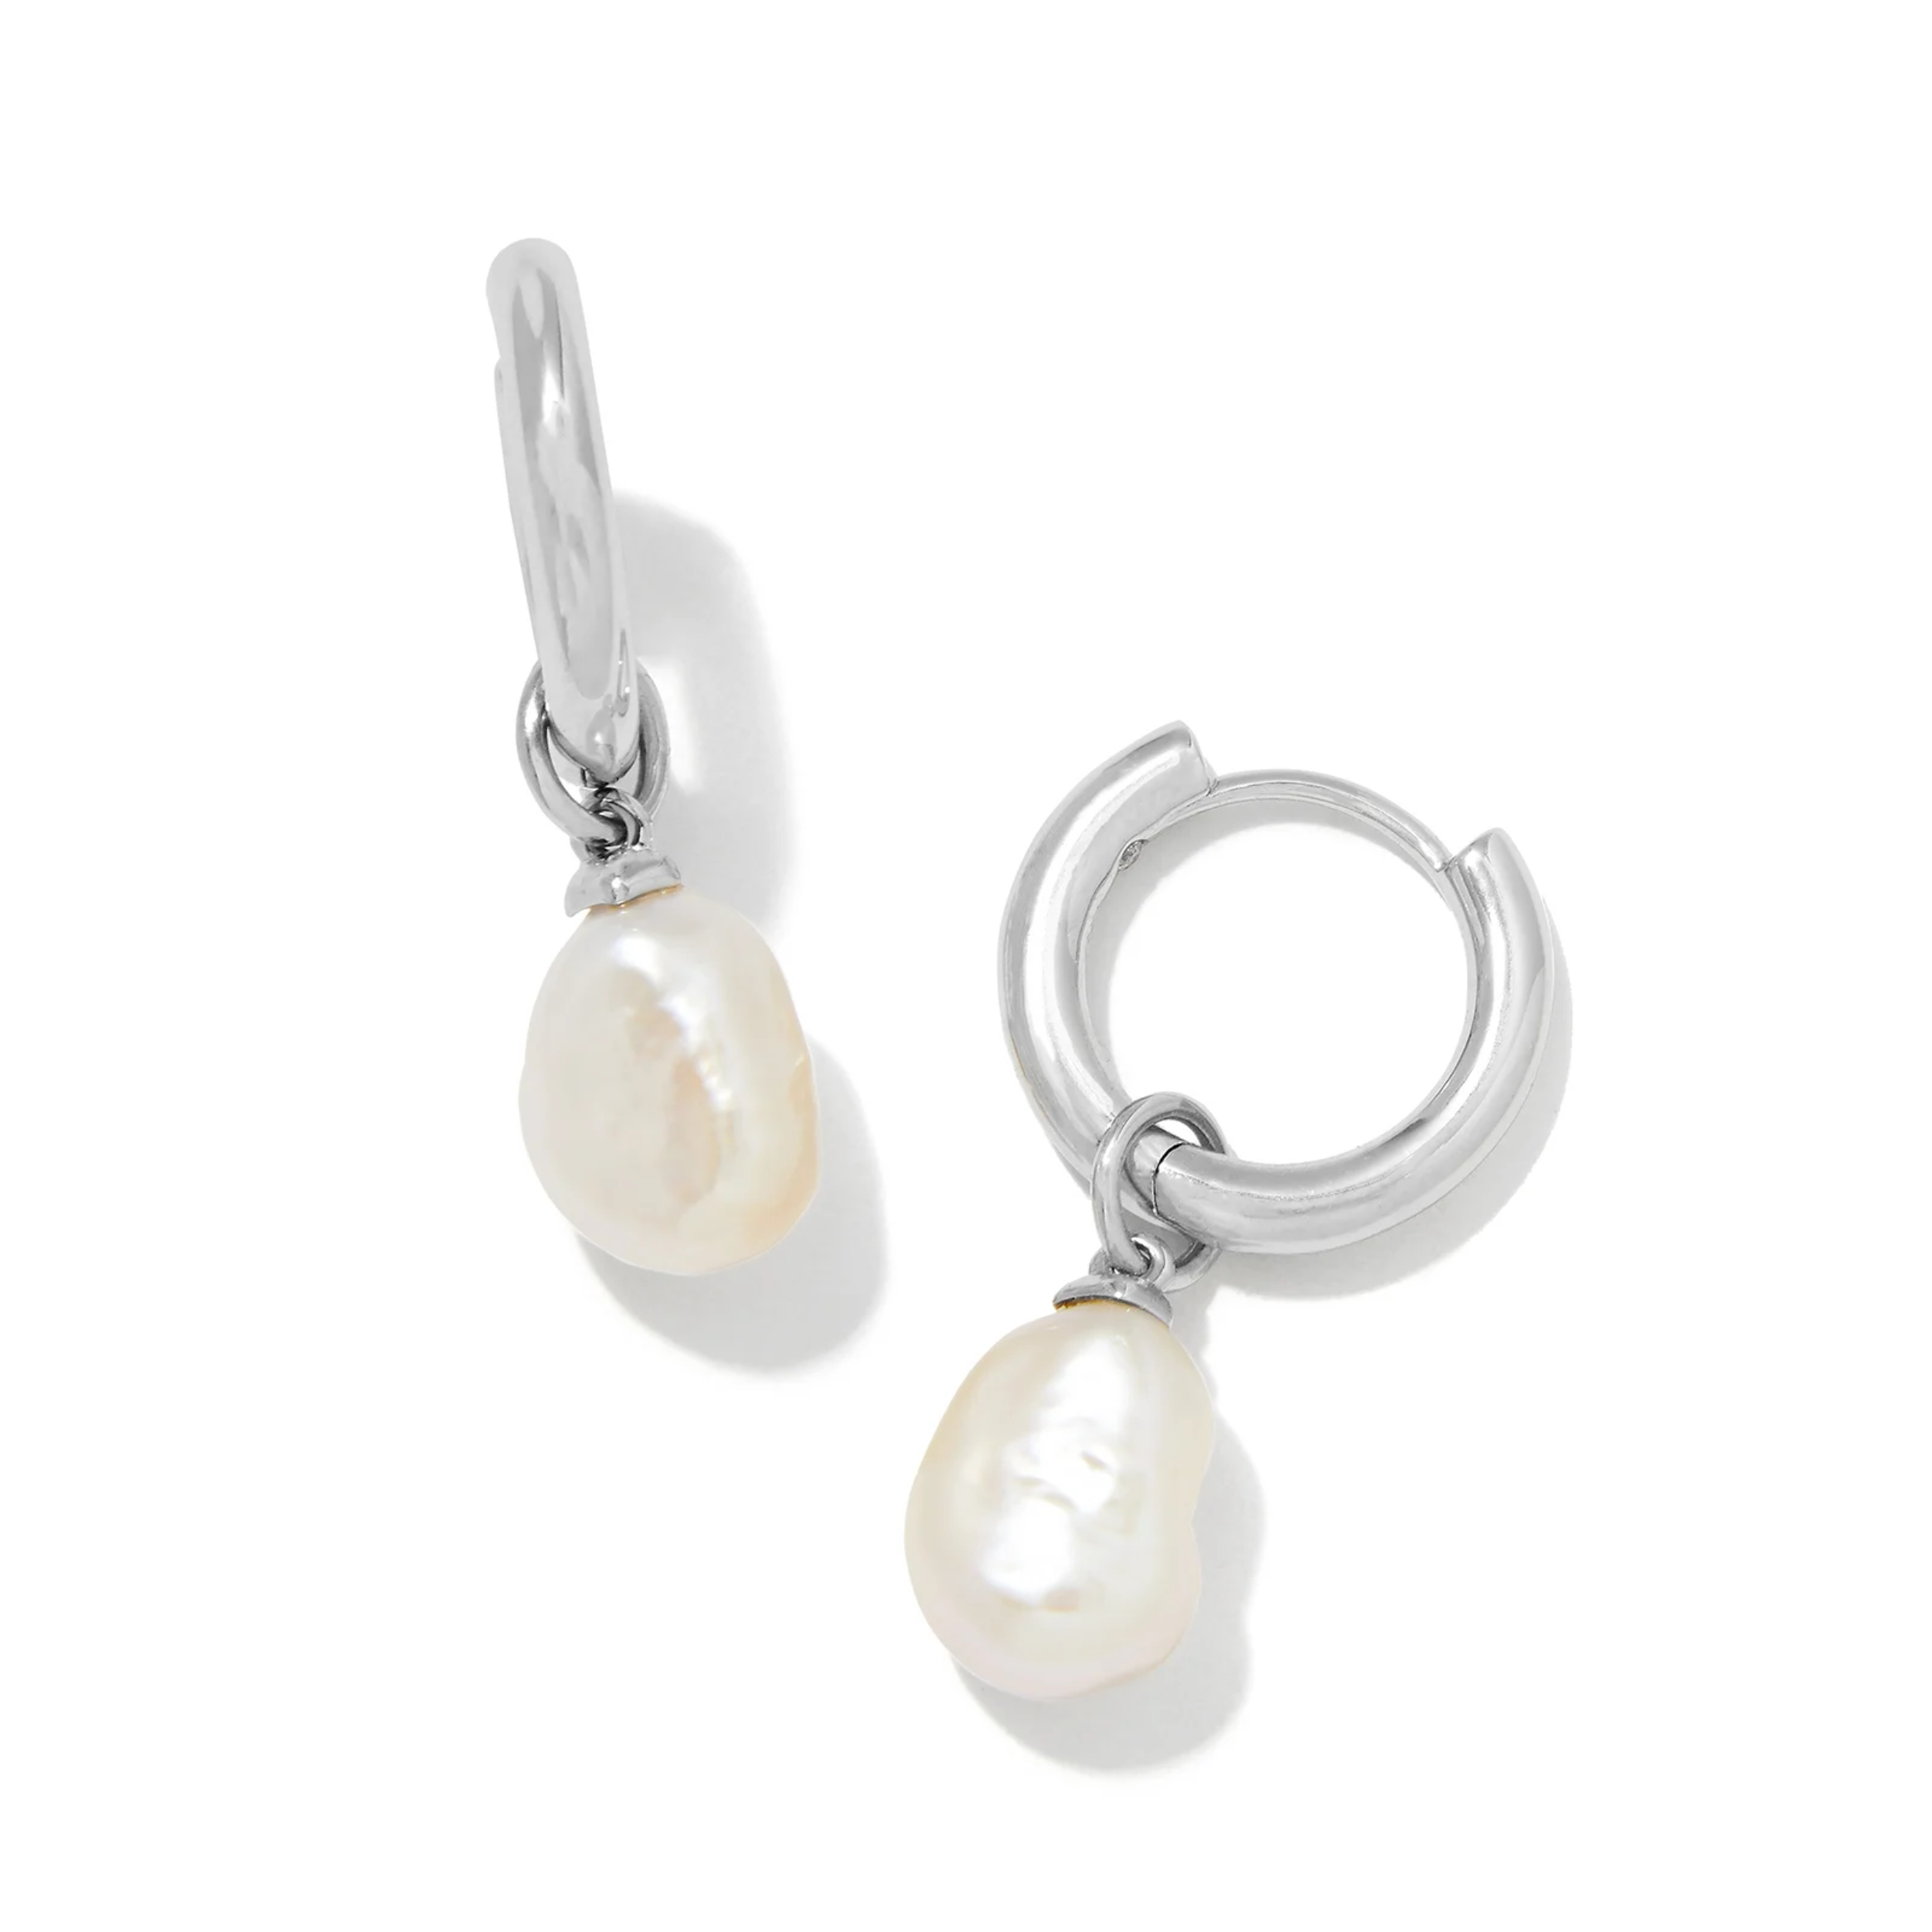 These willa Silver Pearl Huggie earrings in White Pearl by Kendra Scott are pictured on a white background.